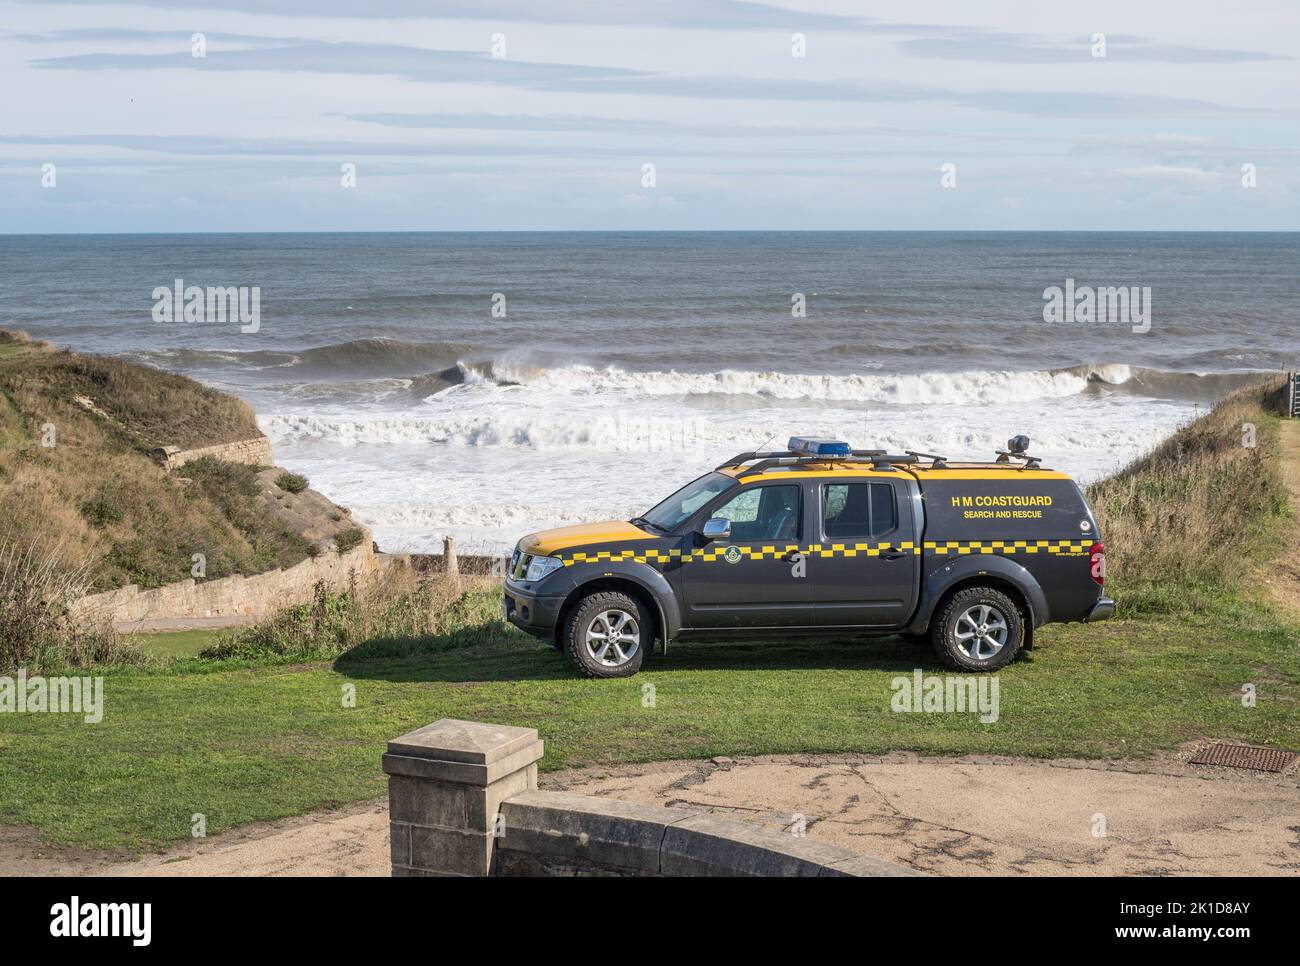 H M coastguard search and rescue vehicle parked above cliffs in Seaham, Co. Durham, England, UK Stock Photo